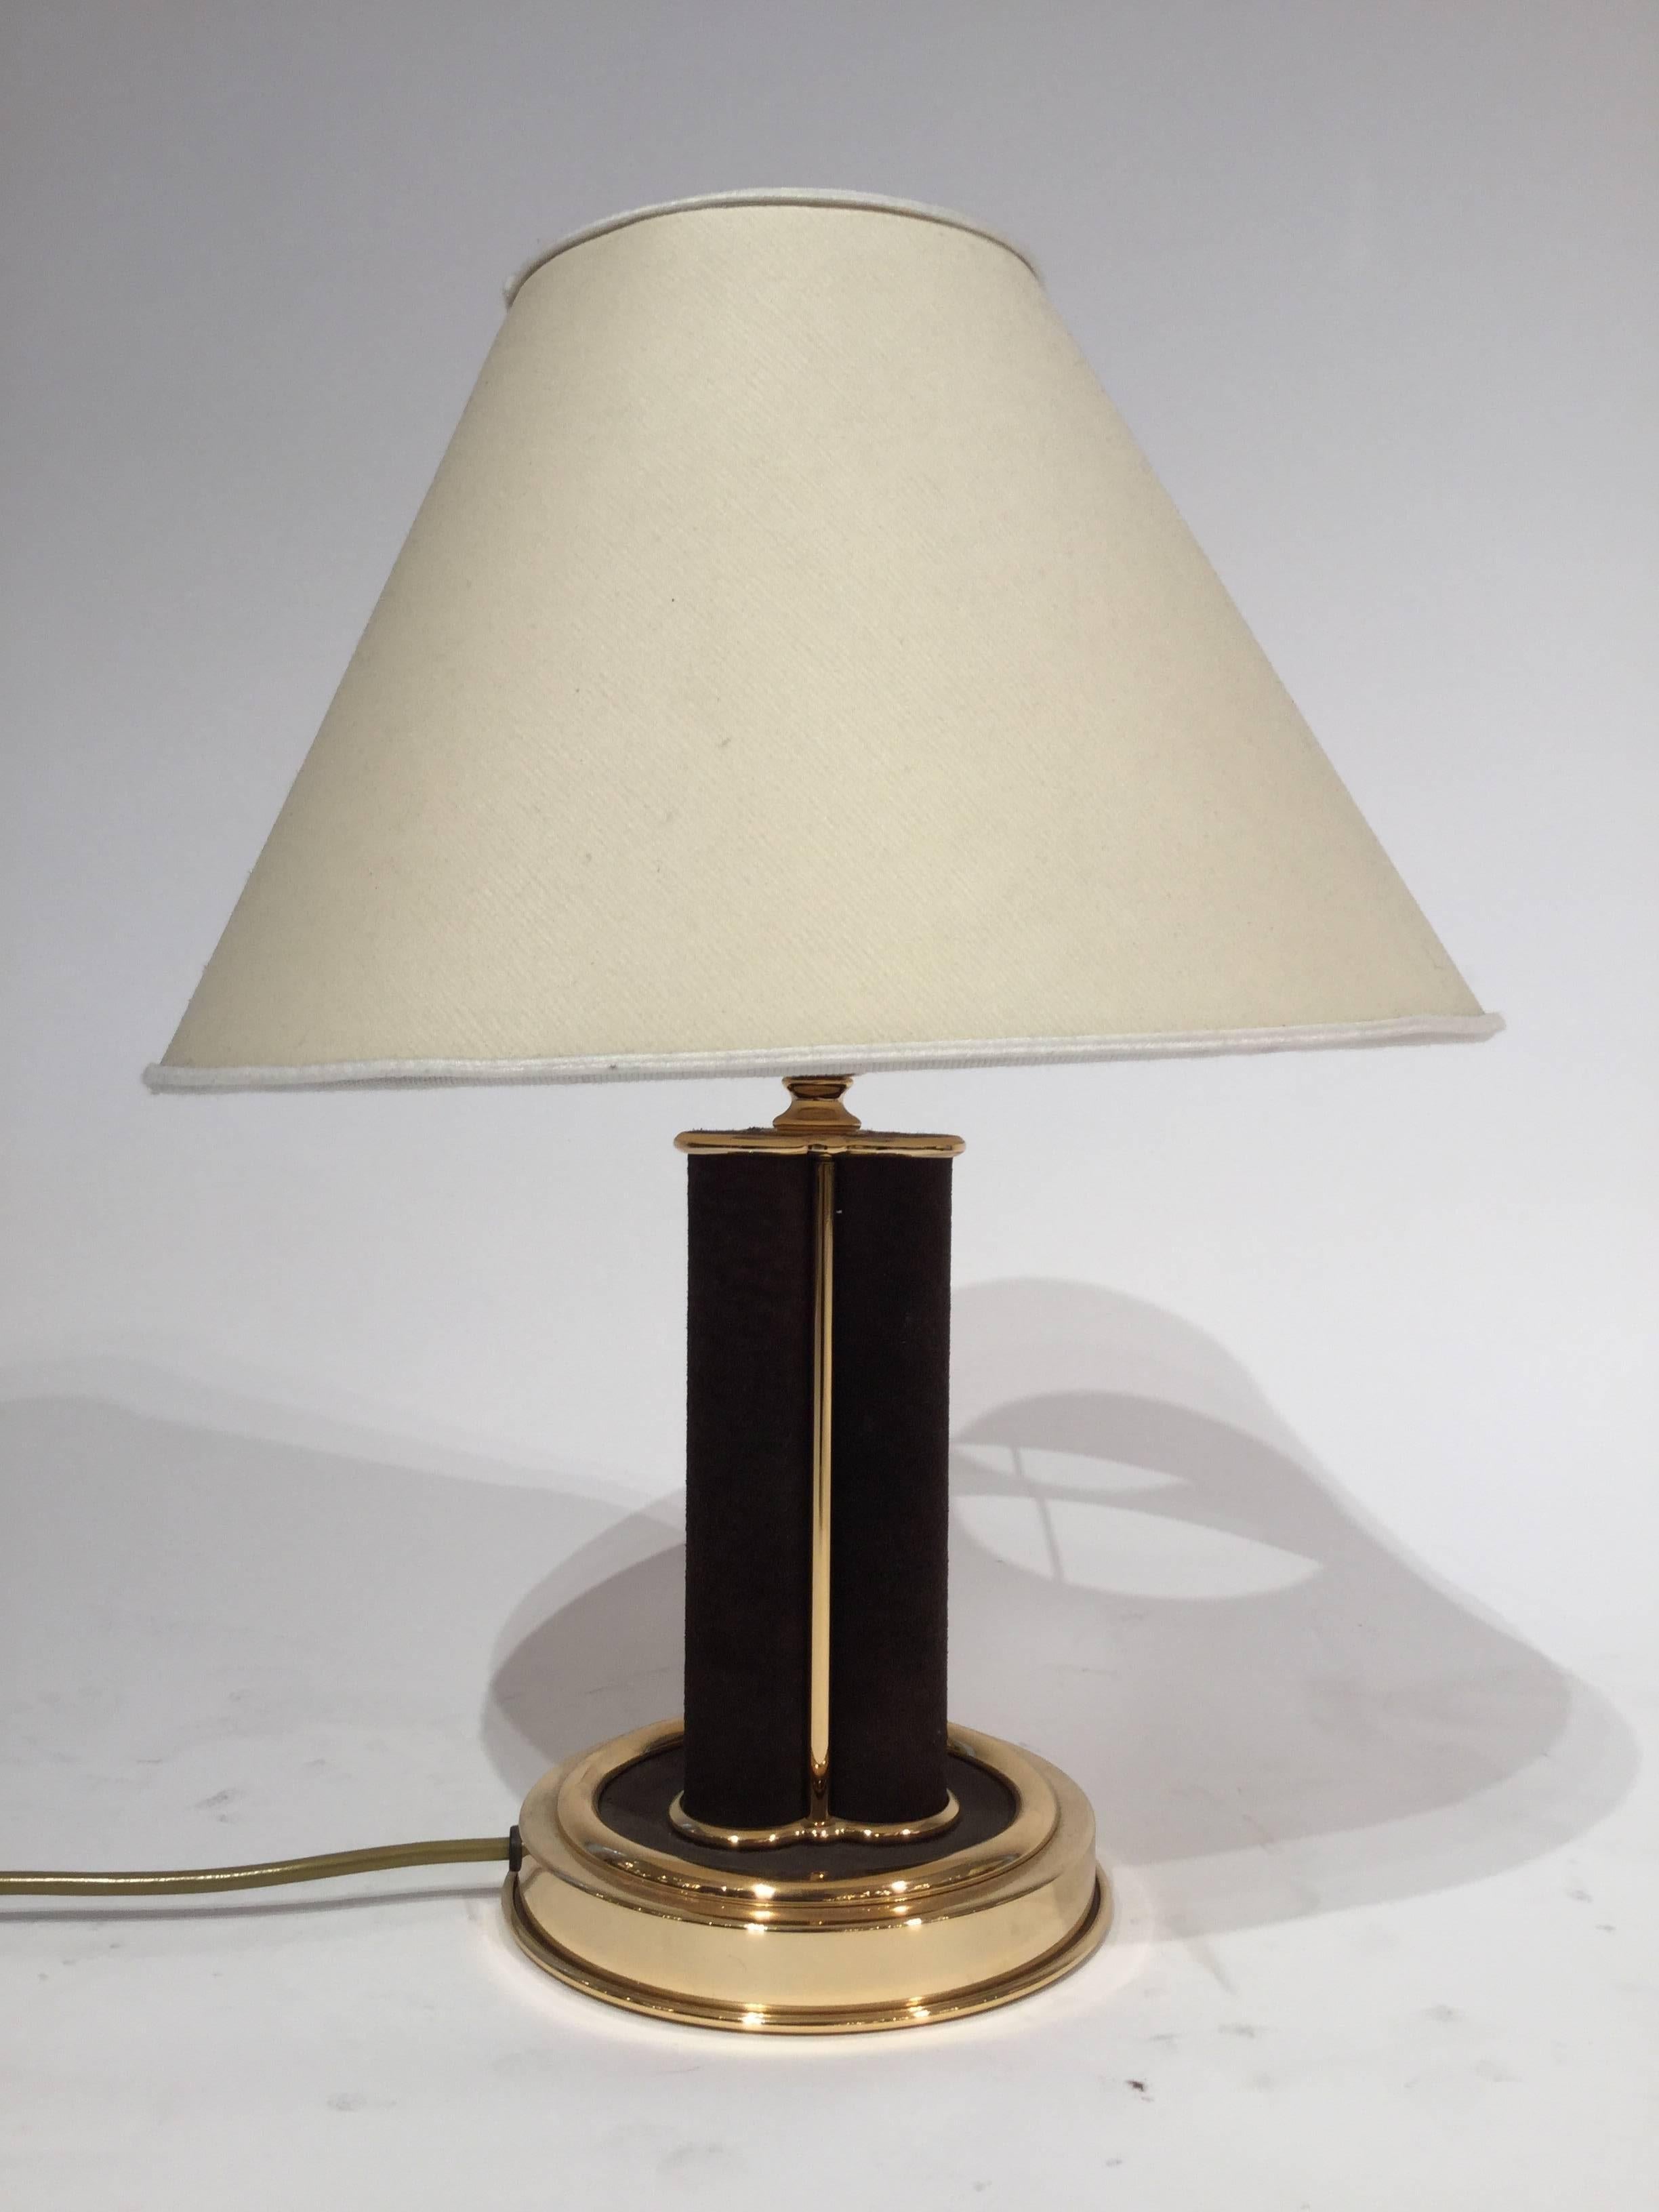 A pair of Italian designed table lamps in suede and brass, circa 1960.